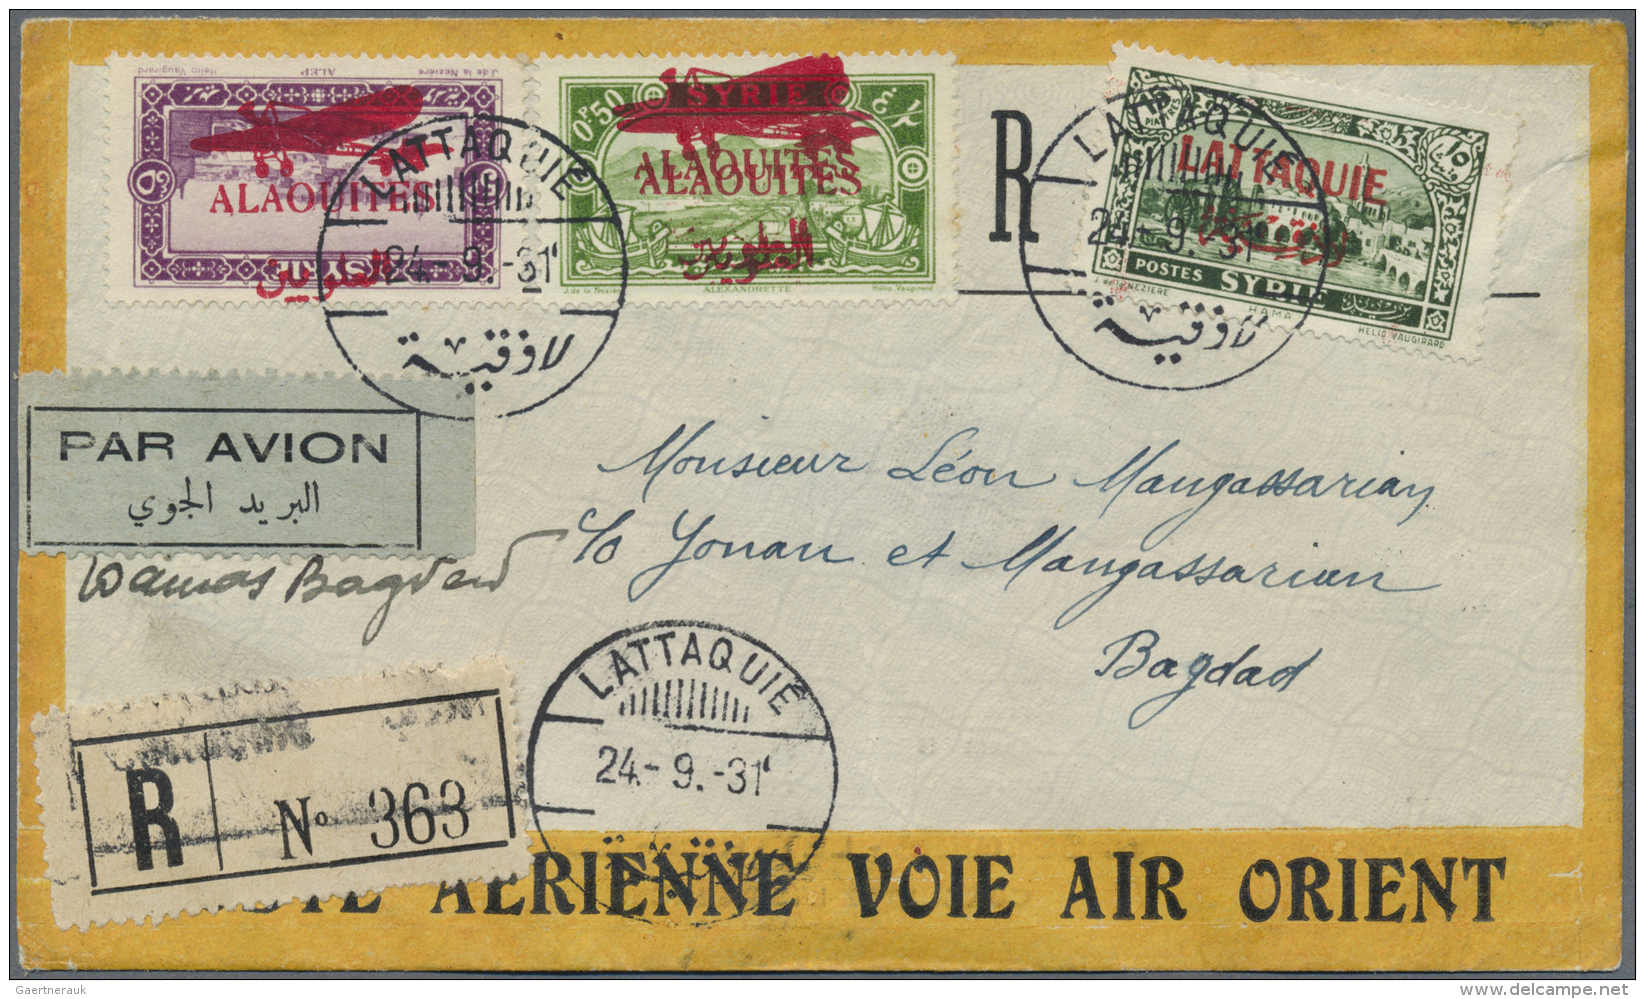 Alawiten-Gebiet: 1931, Registered Air Mail Cover From LATTAQUIE By AIR ORIENT Bearing 5p. Violet With Red Inverted Overp - Covers & Documents